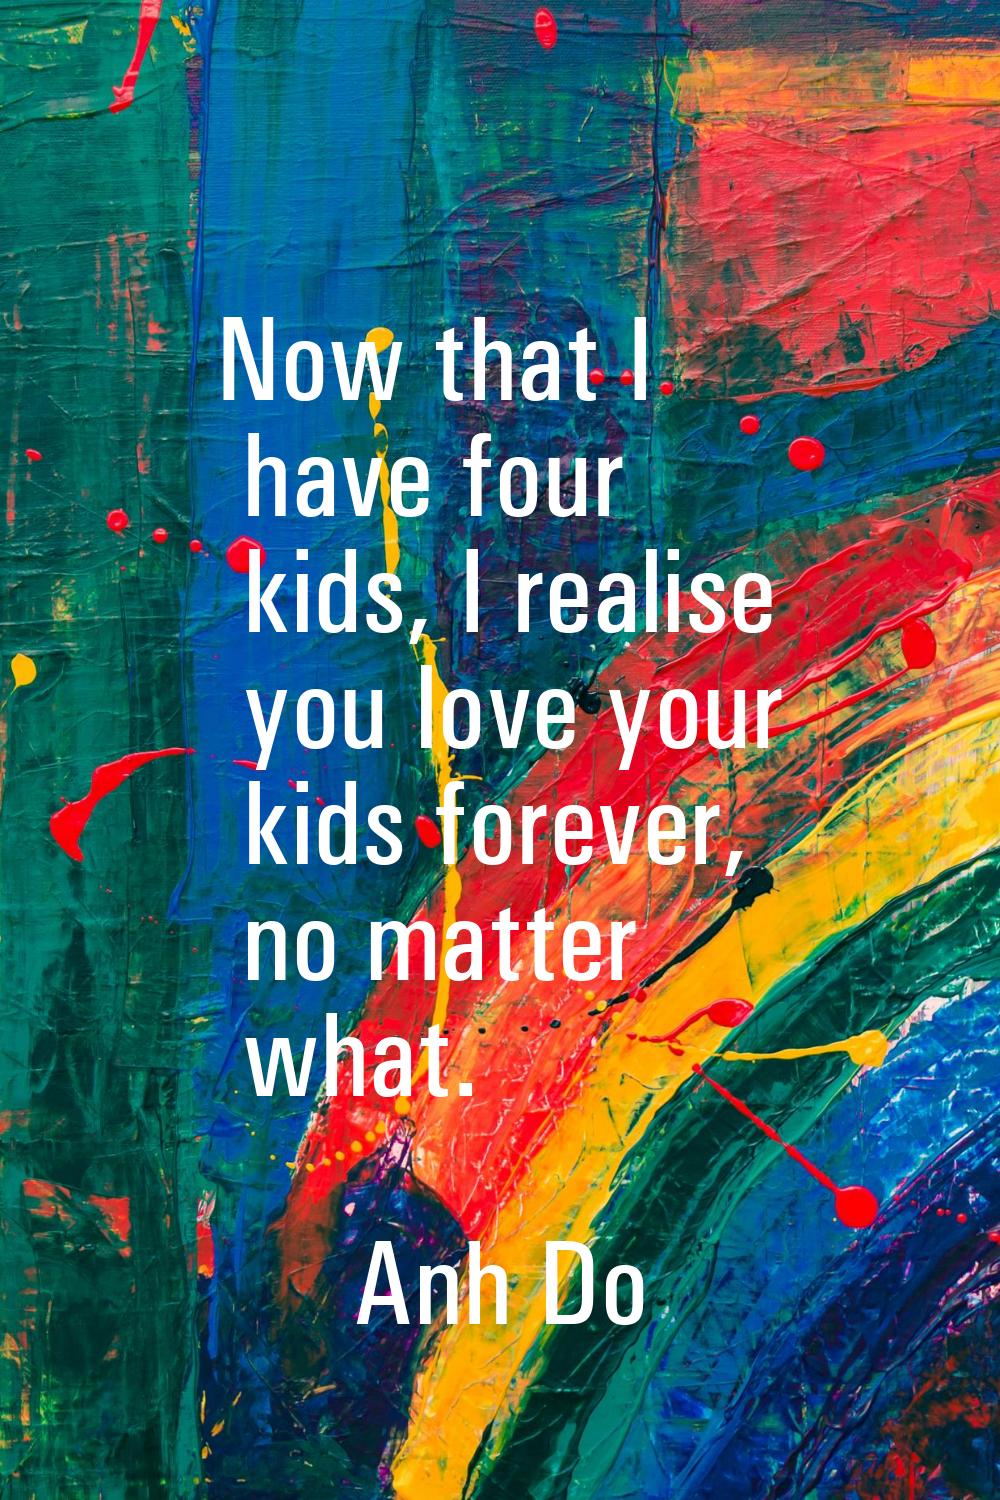 Now that I have four kids, I realise you love your kids forever, no matter what.